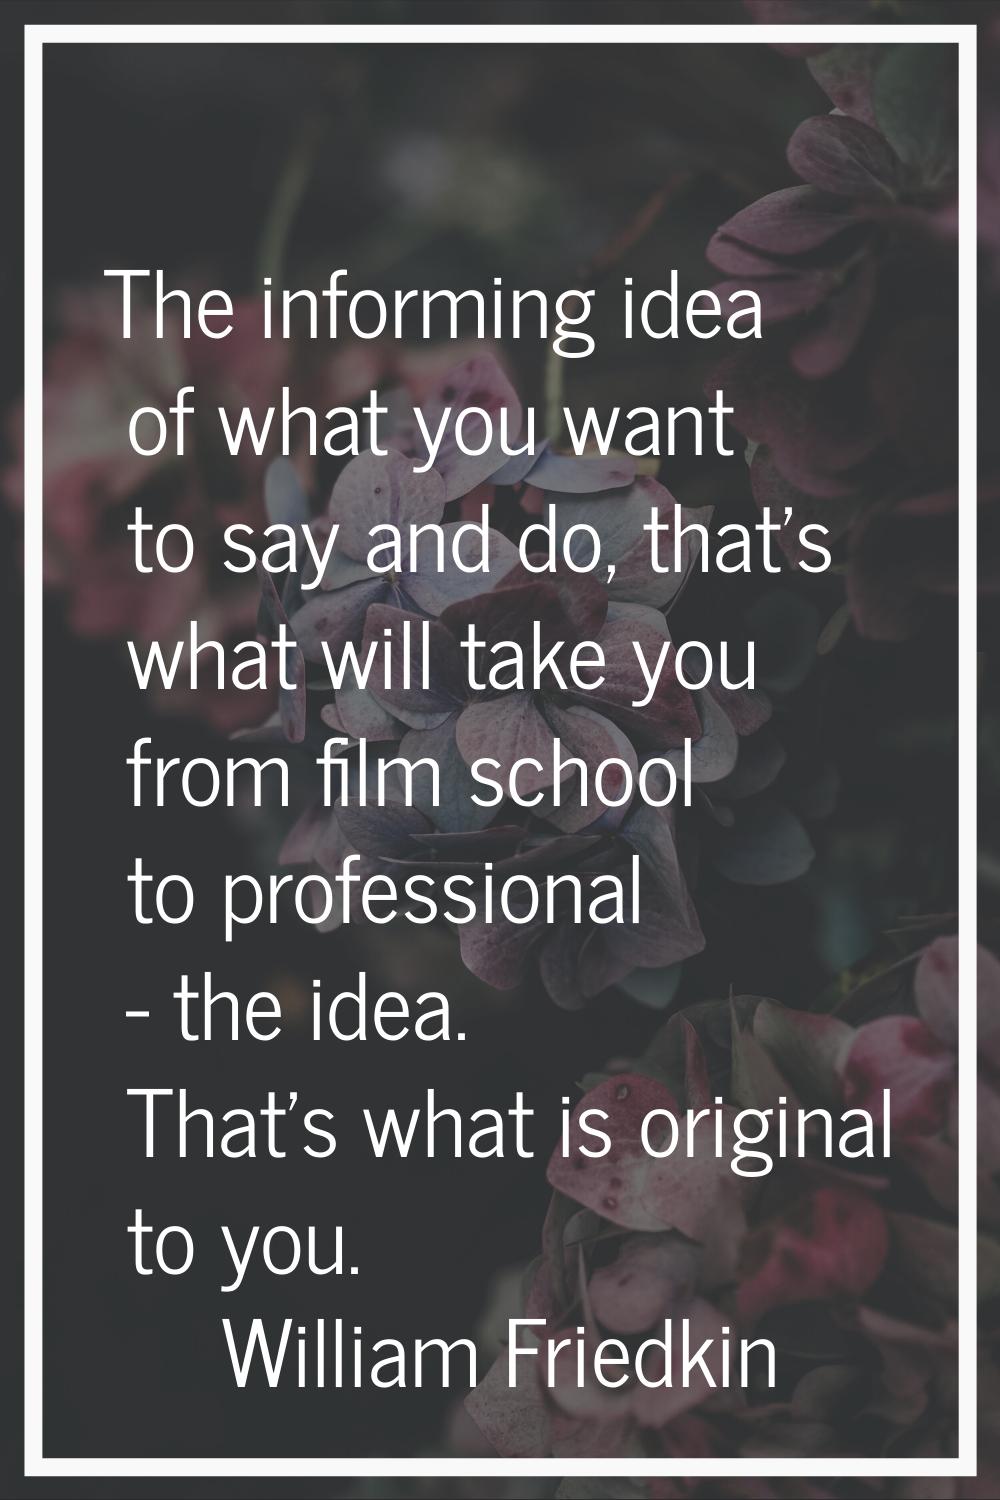 The informing idea of what you want to say and do, that's what will take you from film school to pr